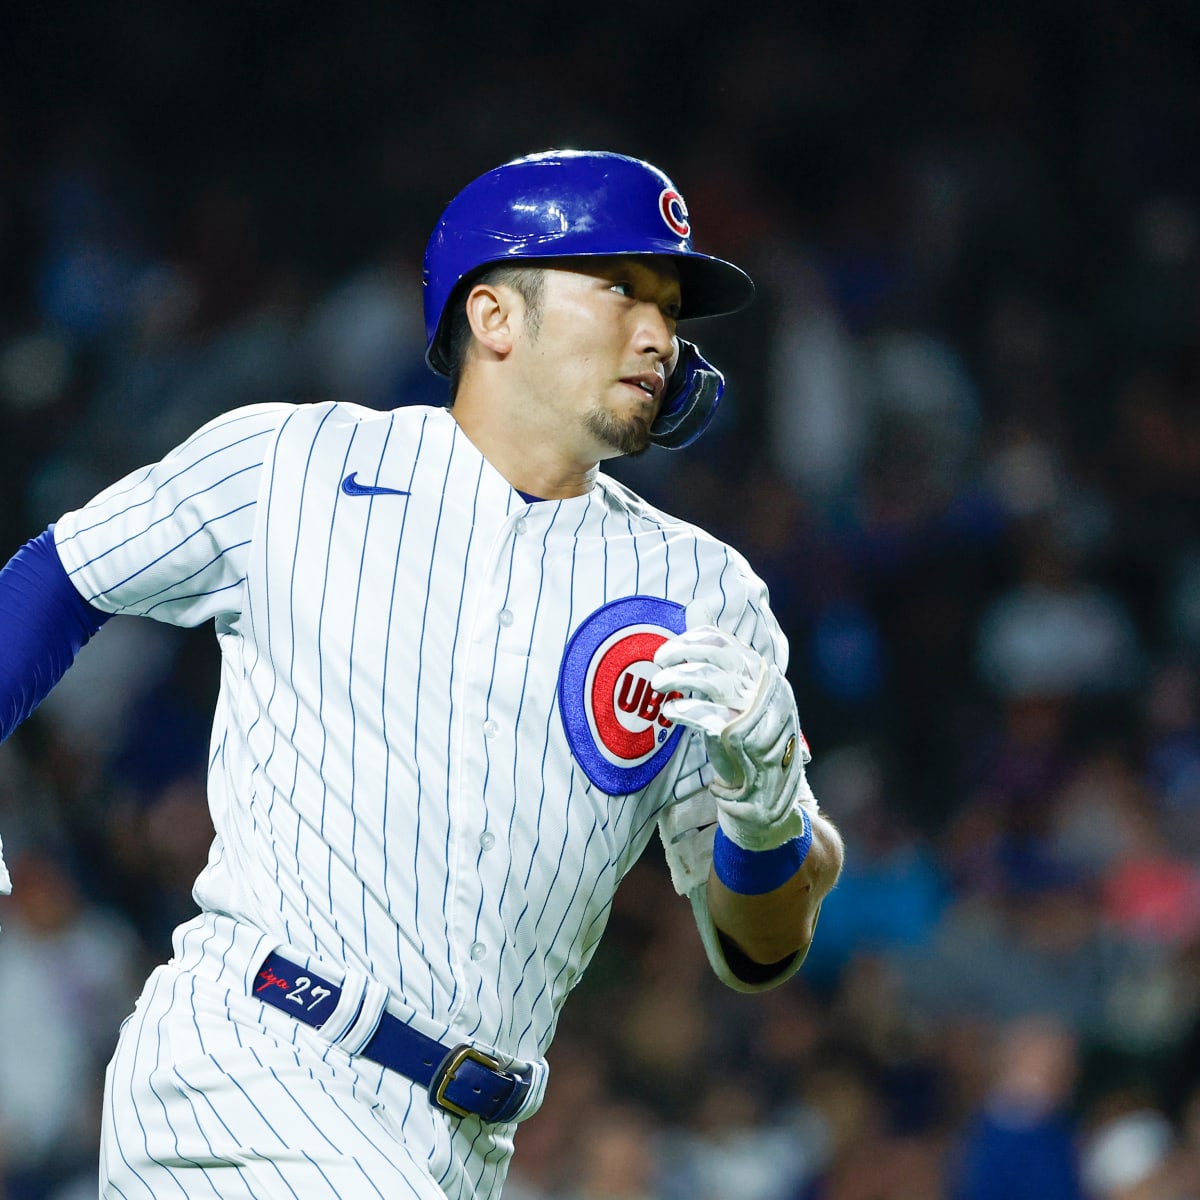 Chicago Cubs Playoff, Wild Card Path Getting Tighter After Loss